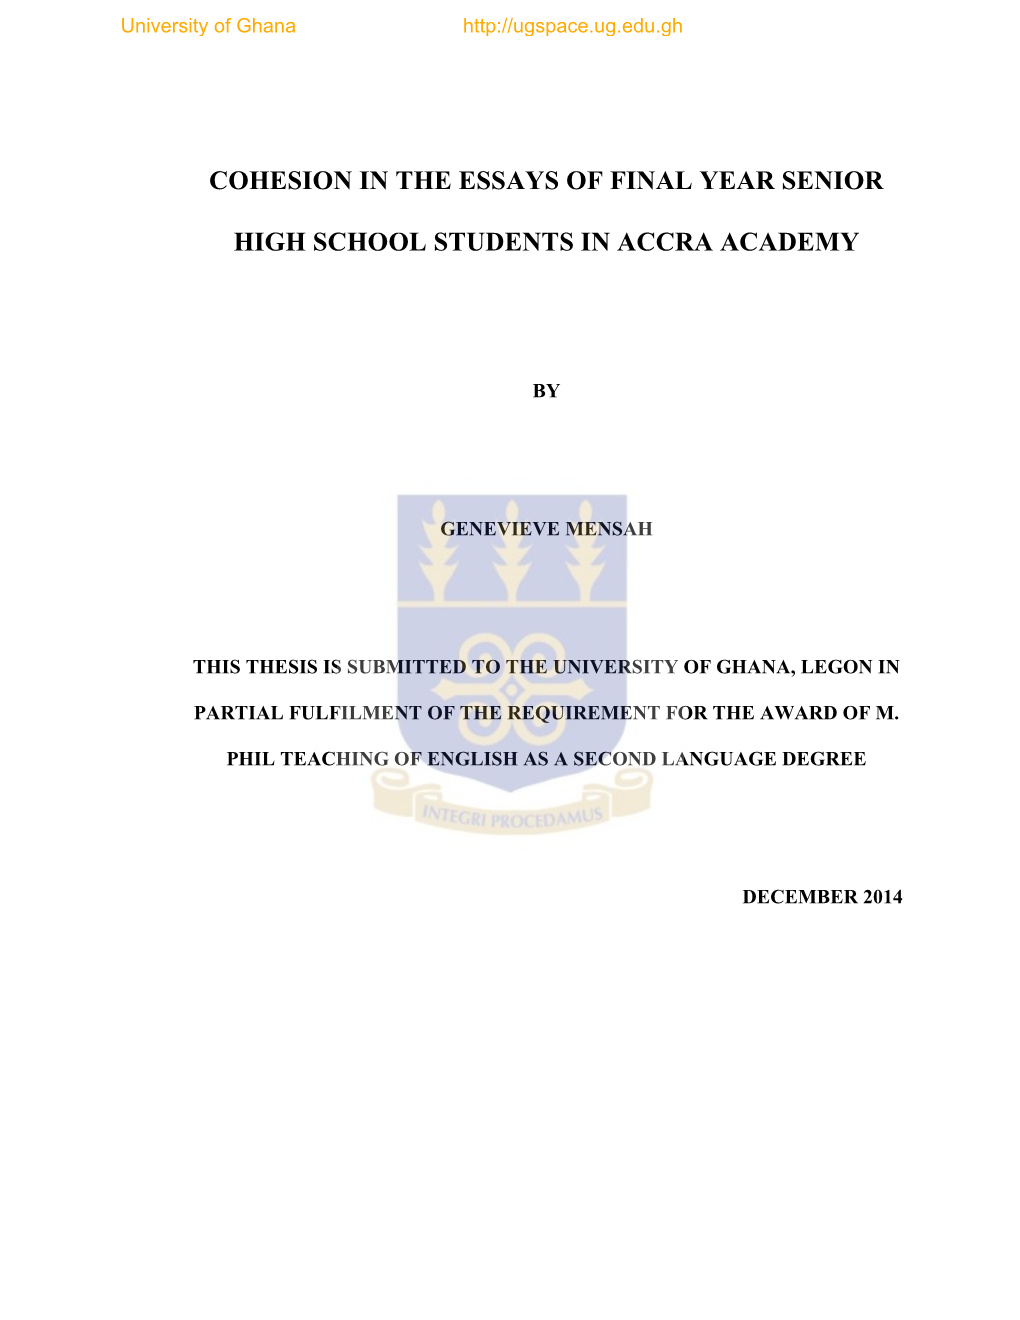 Cohesion in the Essays of Final Year Senior High